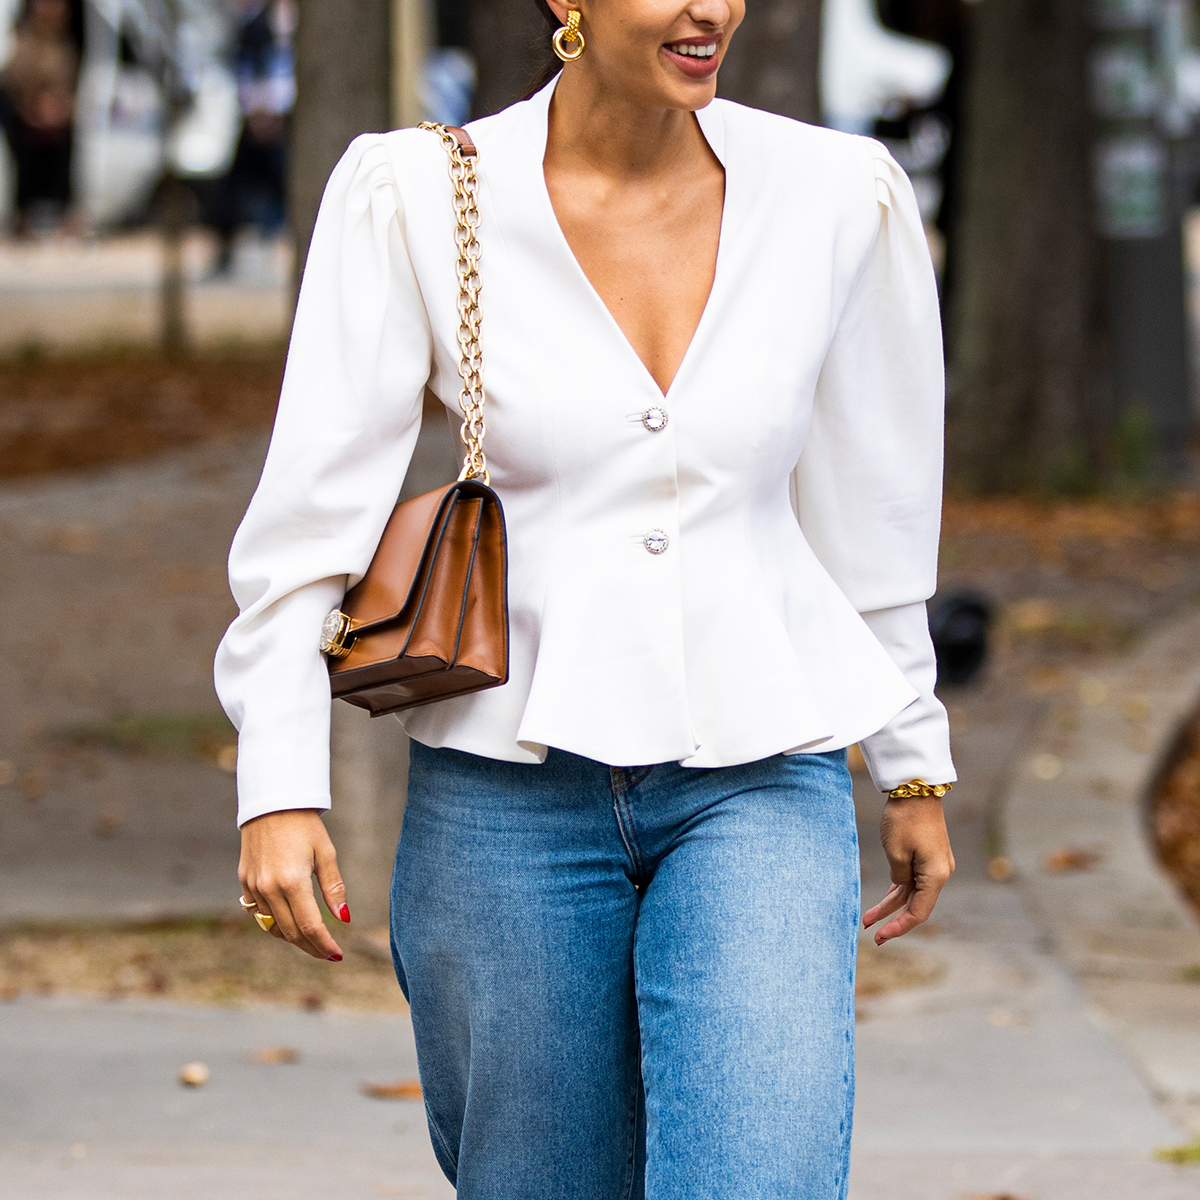 The 12 Best Peplum Tops and How to Wear Them